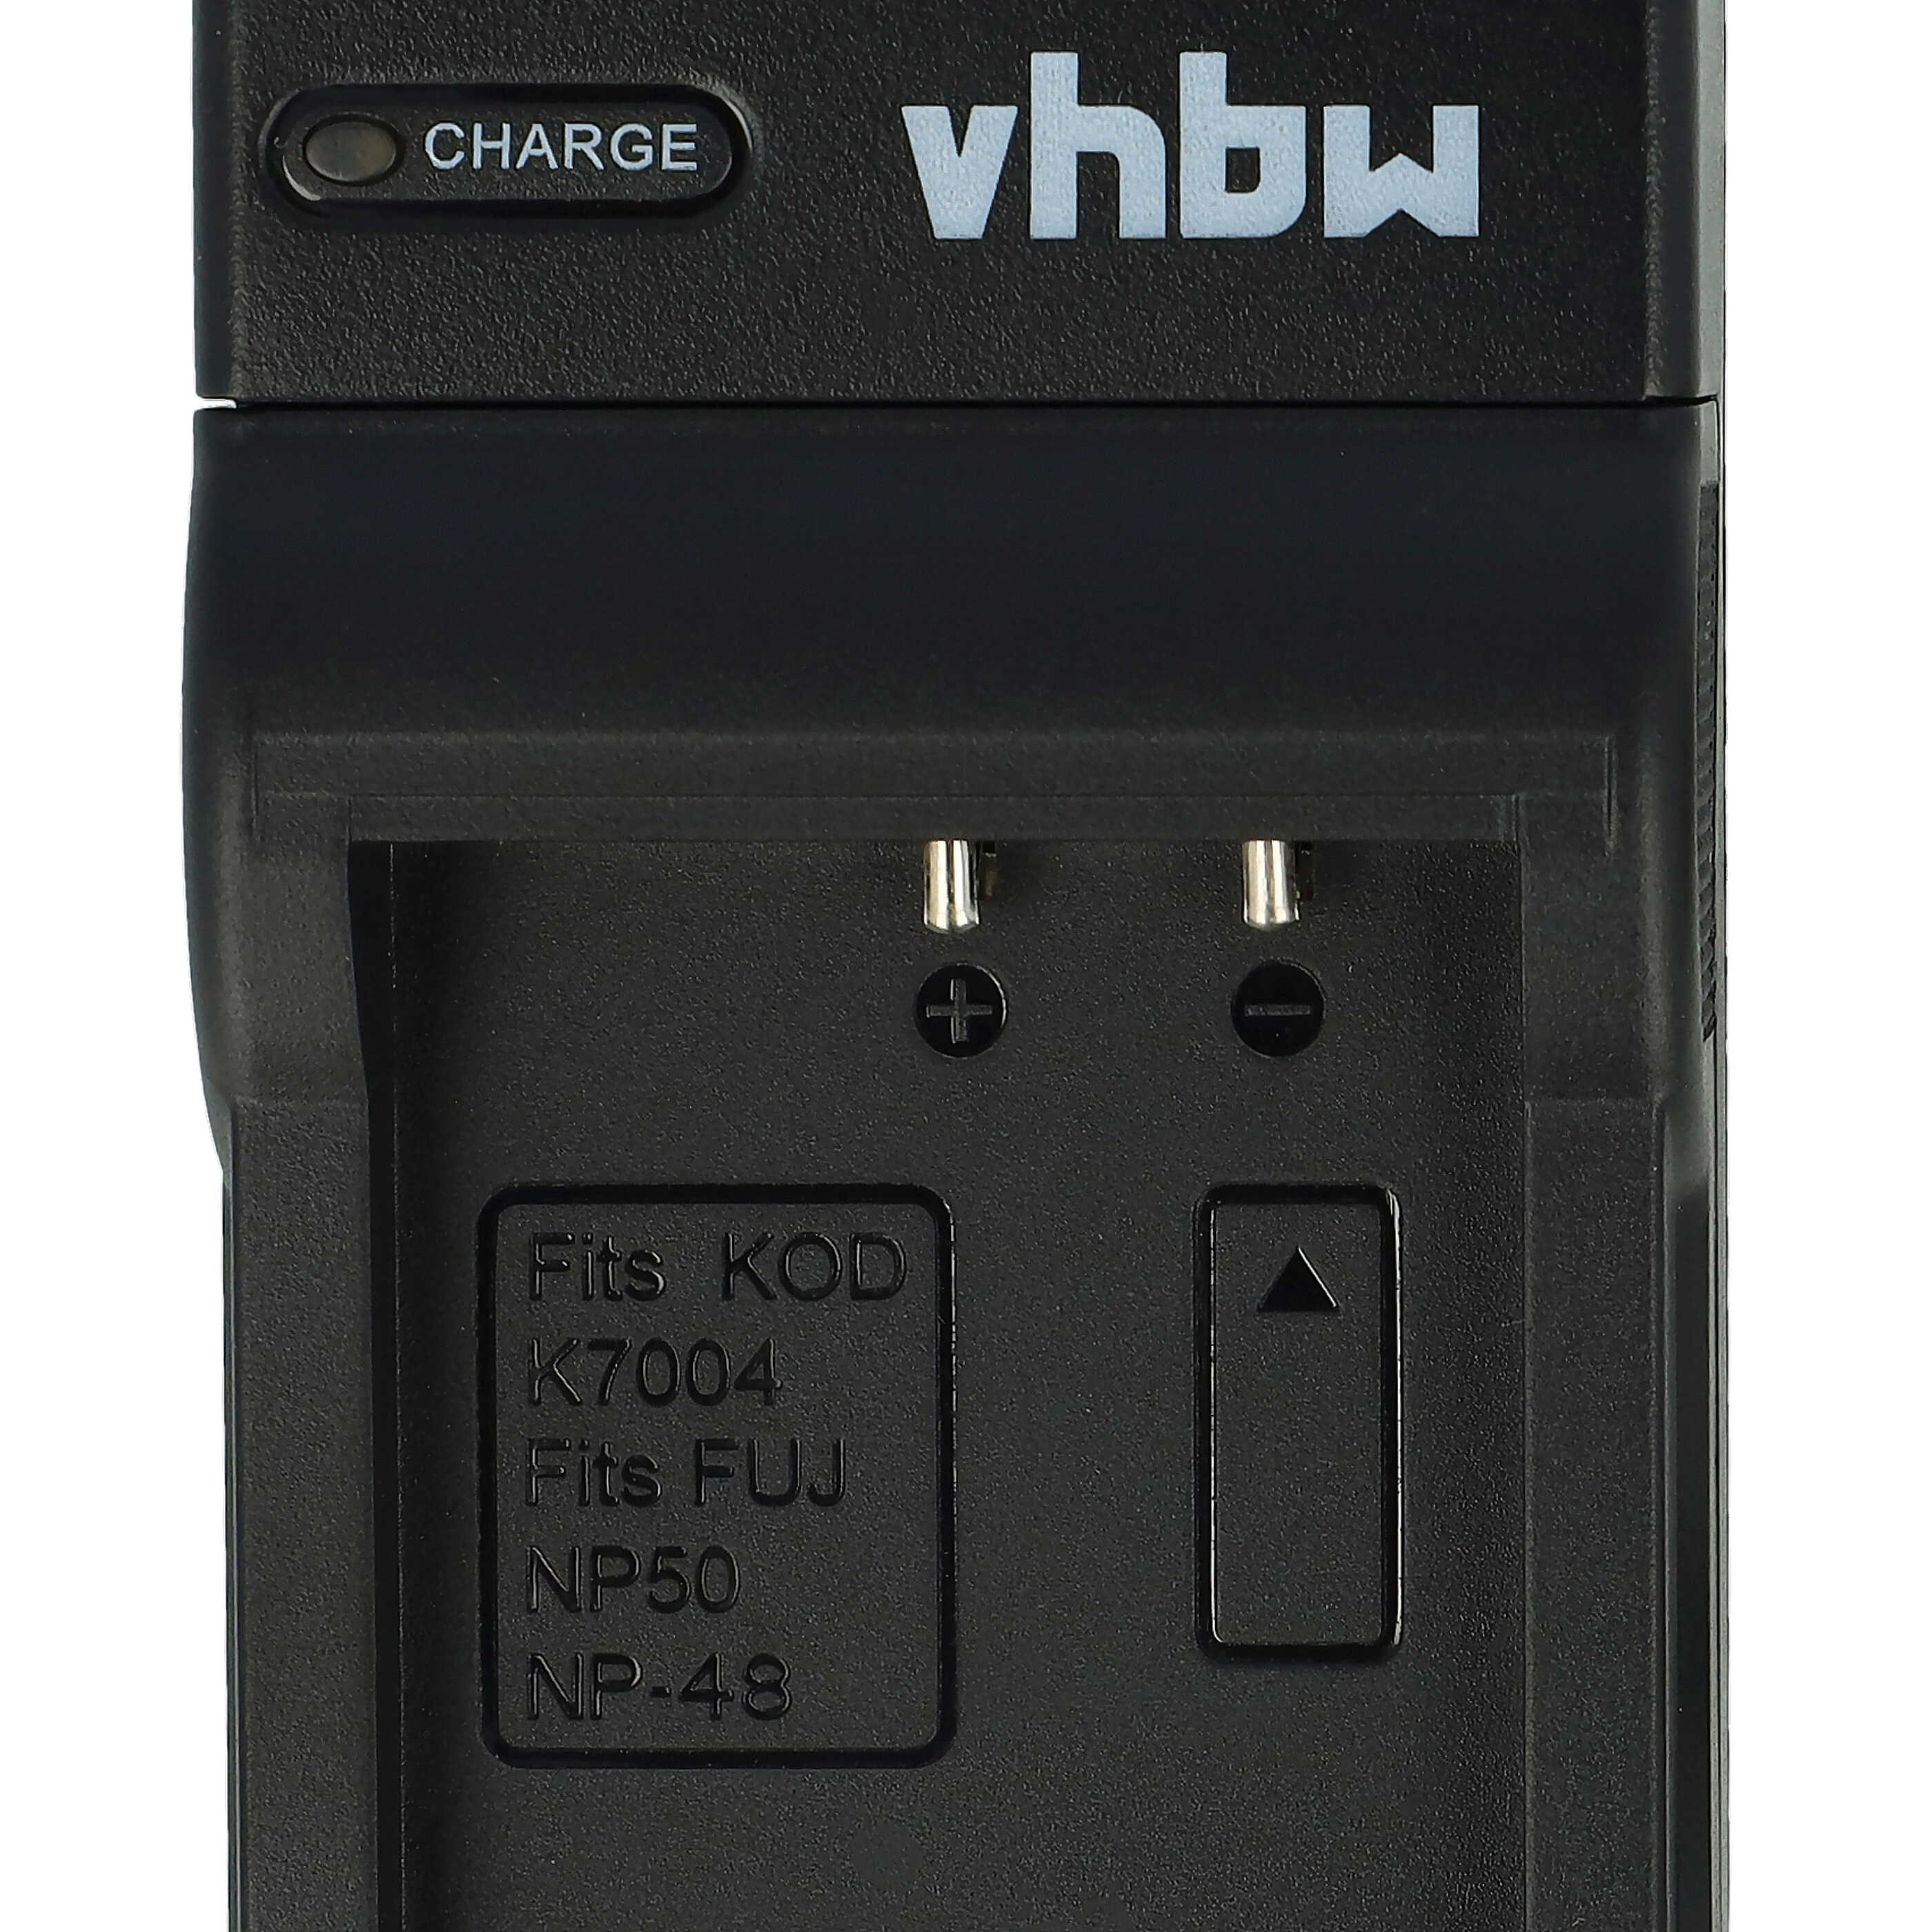 Battery Charger suitable for Fujifilm Digital Camera - 0.5 A, 4.2 V